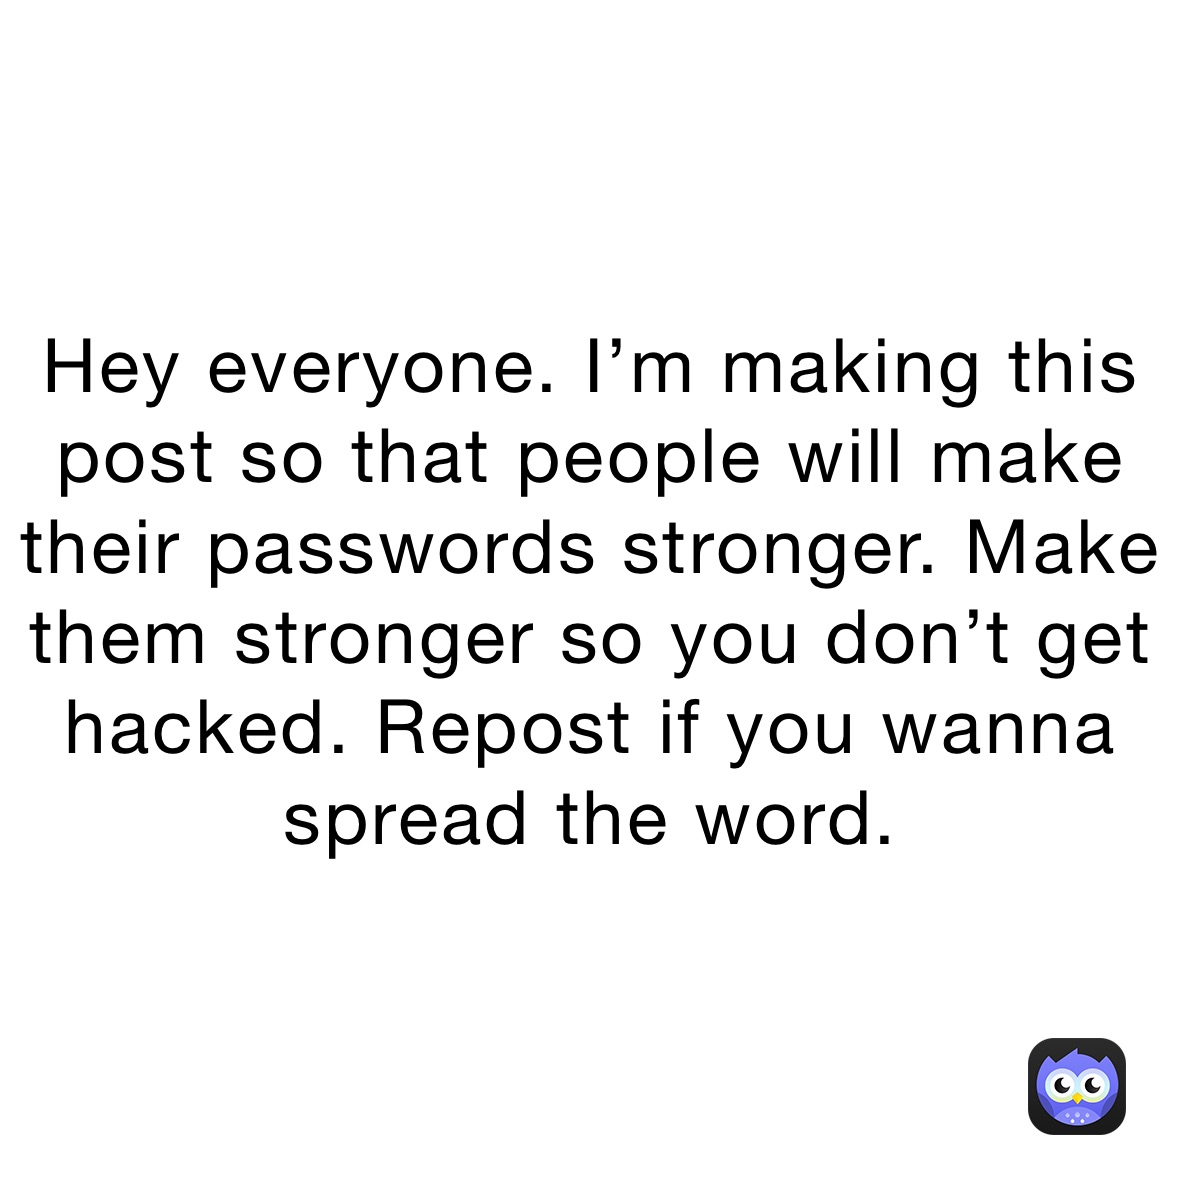 hey-everyone-i-m-making-this-post-so-that-people-will-make-their-passwords-stronger-make-them